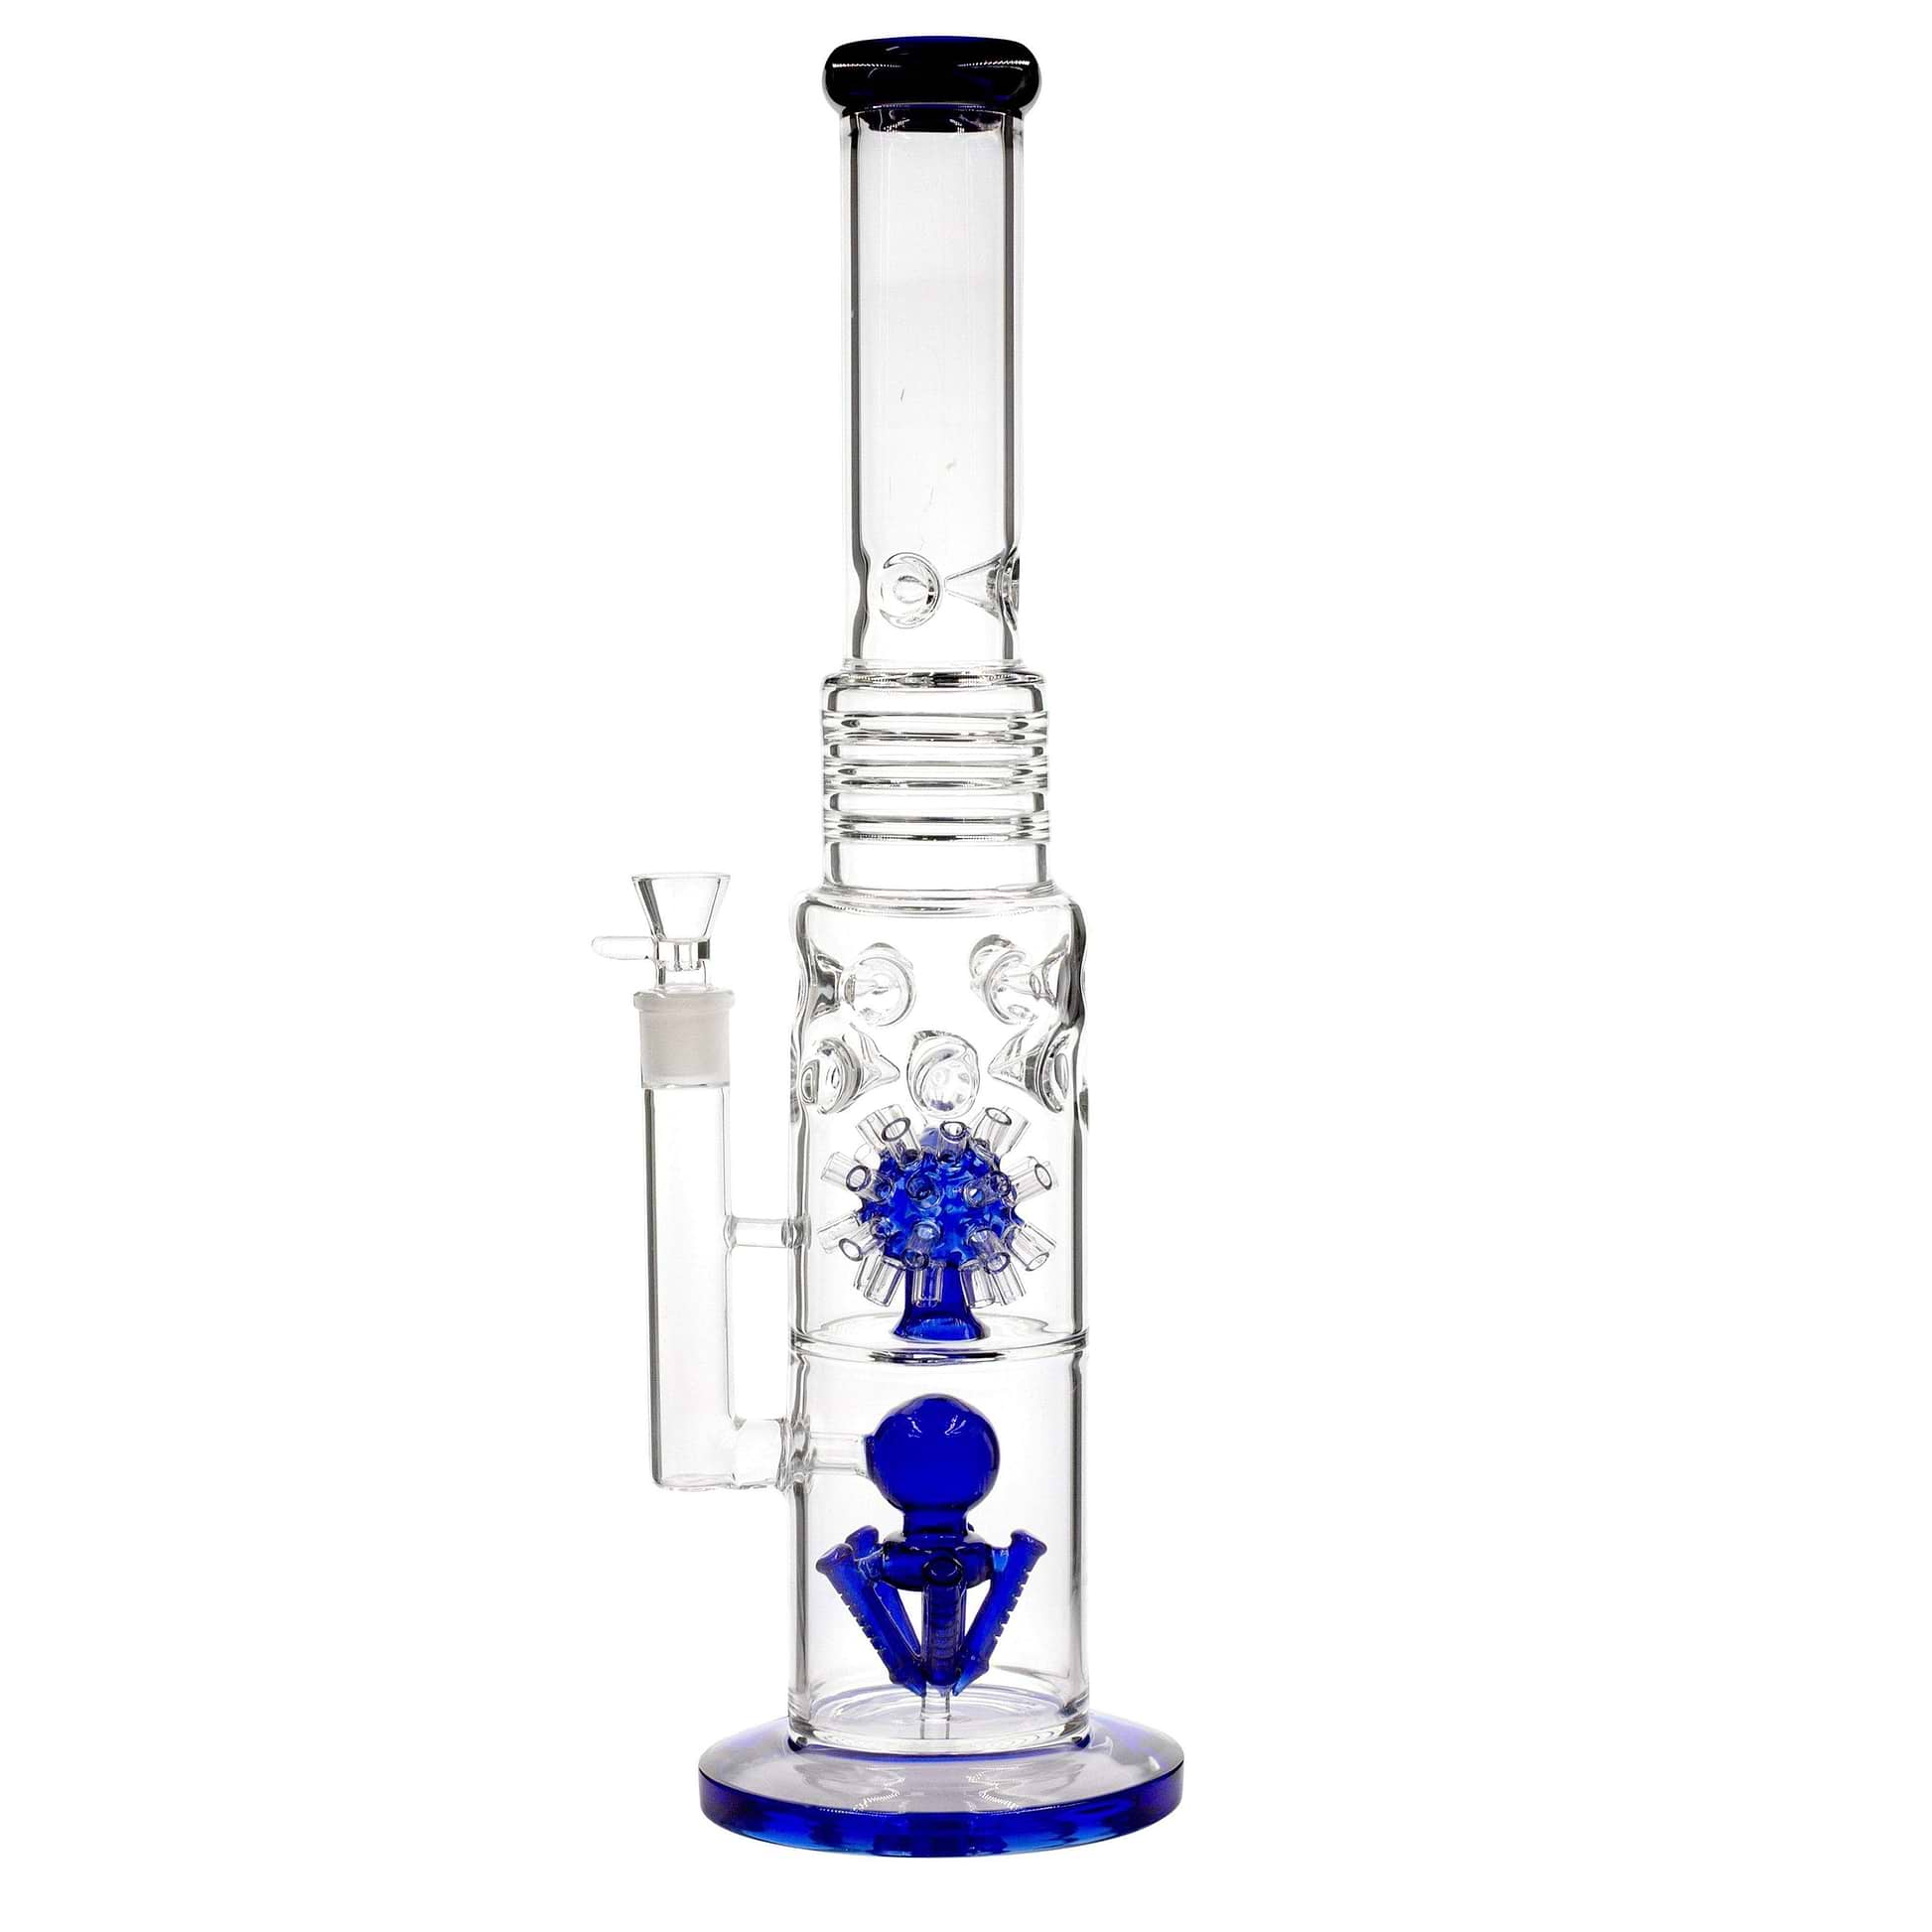 Blue Huge 19-inch glass bong smoking device with 2 percs unique diffision morning star perc unique design sturdy base